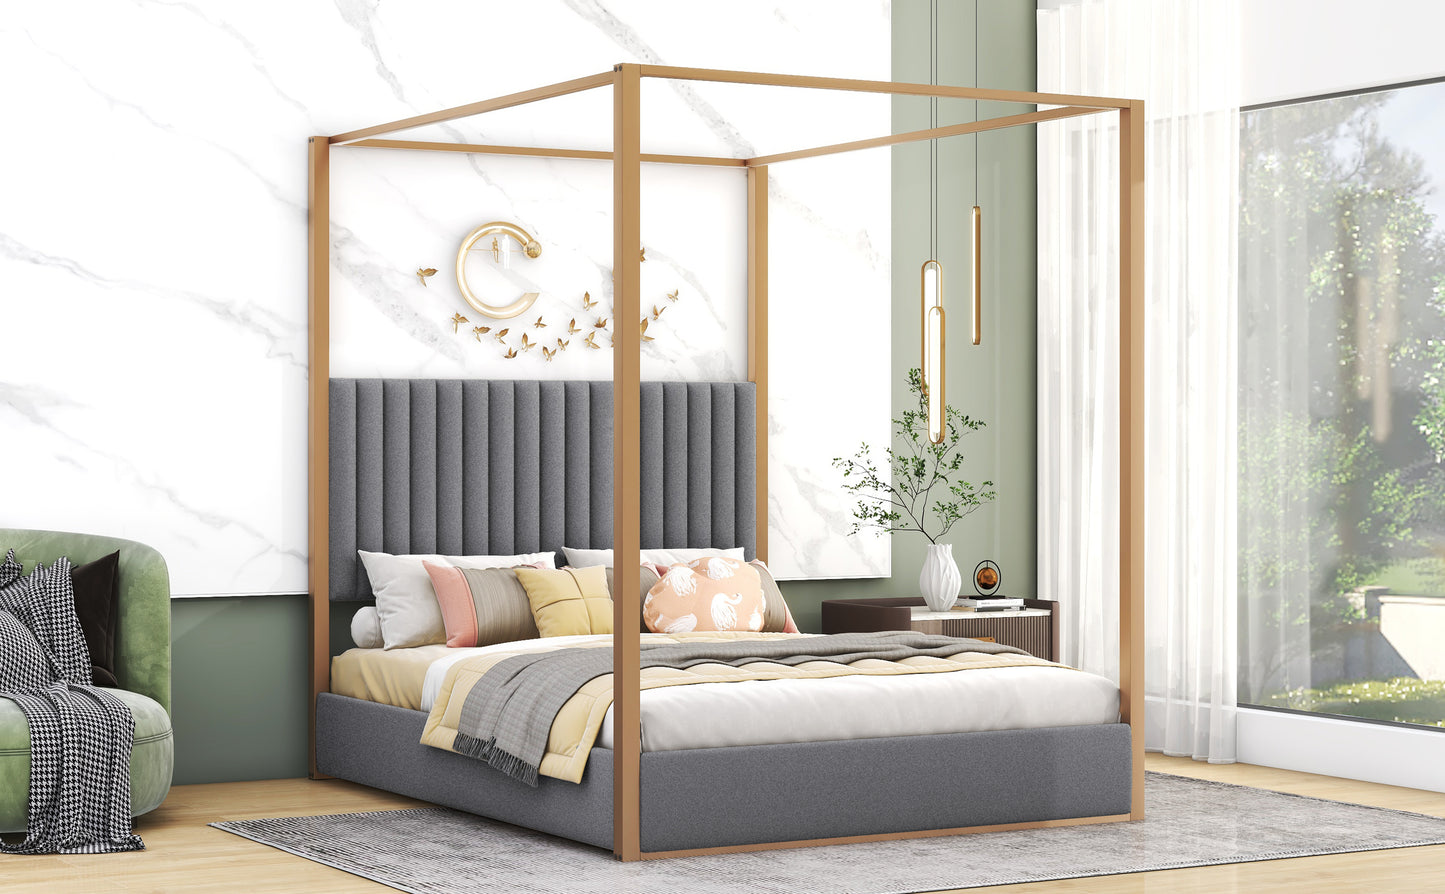 Queen Size Upholstery Canopy Platform Bed with Headboard and Metal Frame, Gray